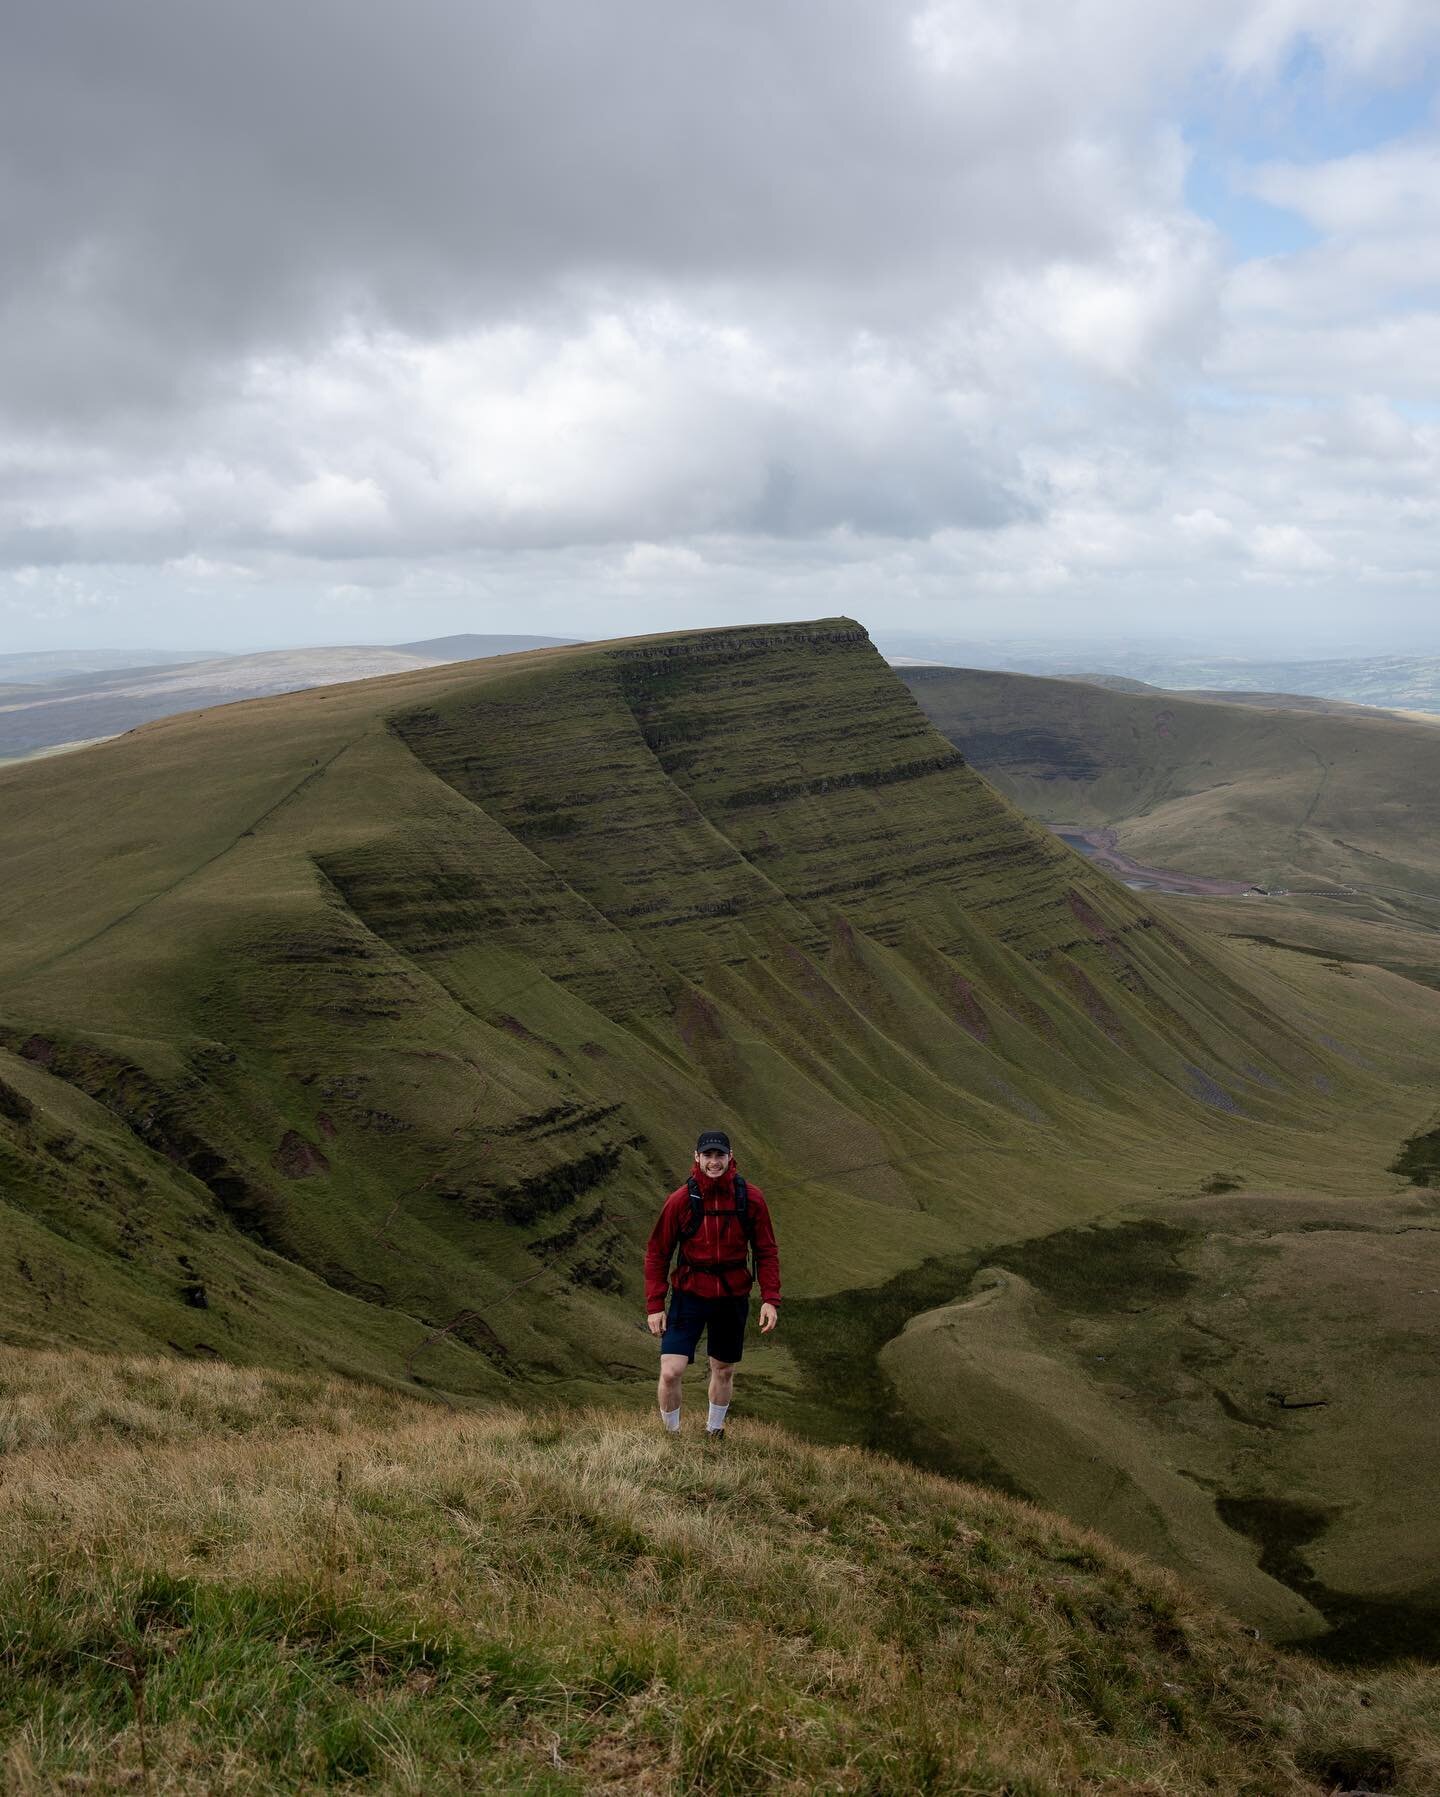 My favourite walk in the Brecon Beacons? 

It has to be the Carmarthenshire fans via the Nant-y-llyn. 

Unfortunately I didn&rsquo;t complete a full loop of both llyn y fan Fach and Fawr due to time constraints but I still was treated to epic views f